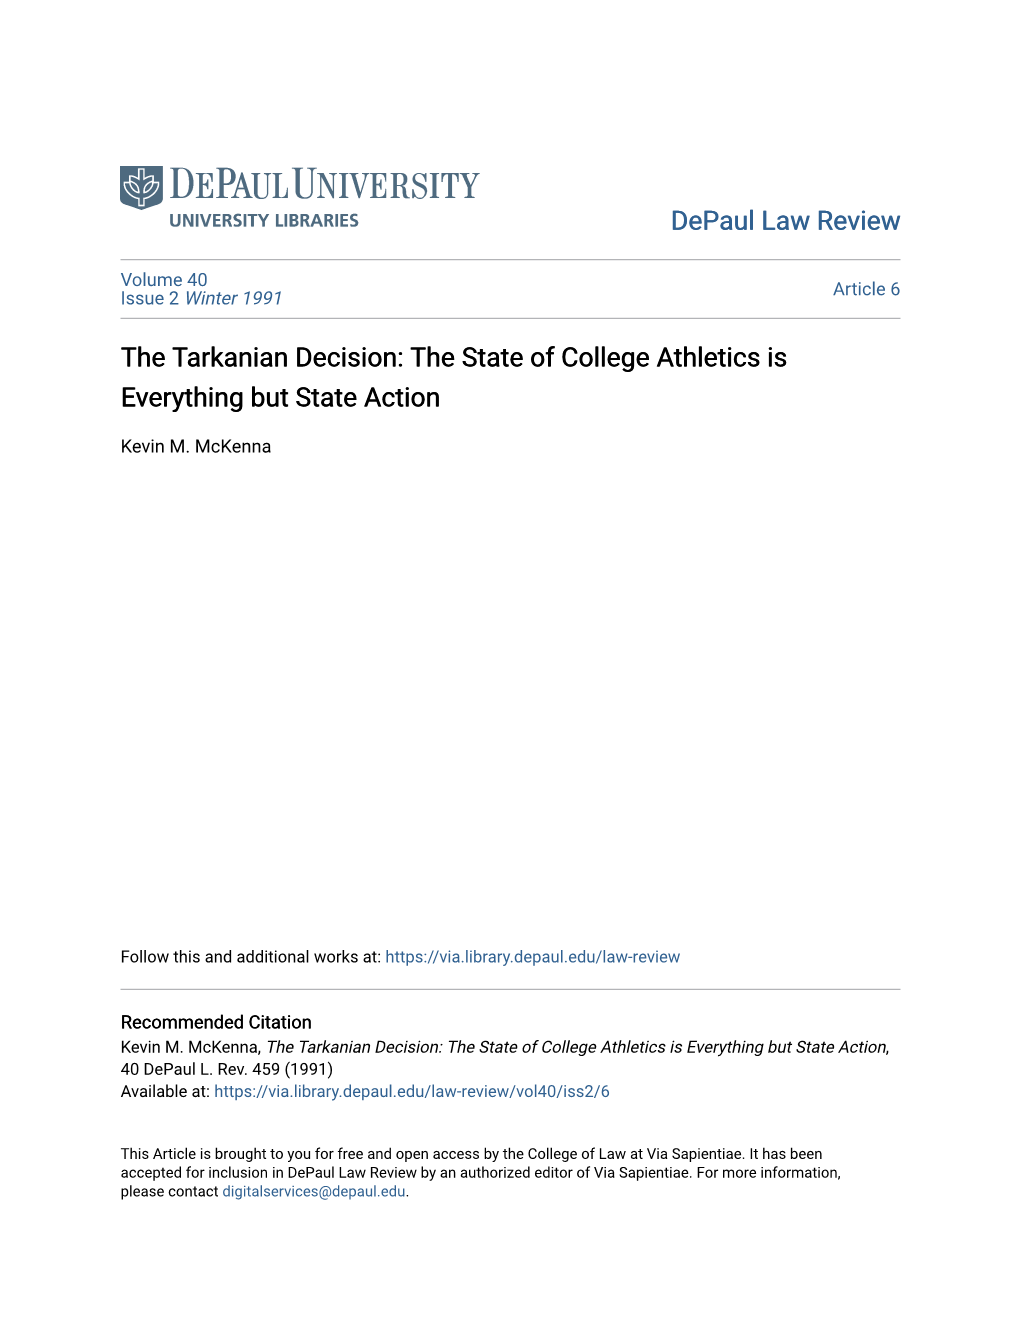 The Tarkanian Decision: the State of College Athletics Is Everything but State Action